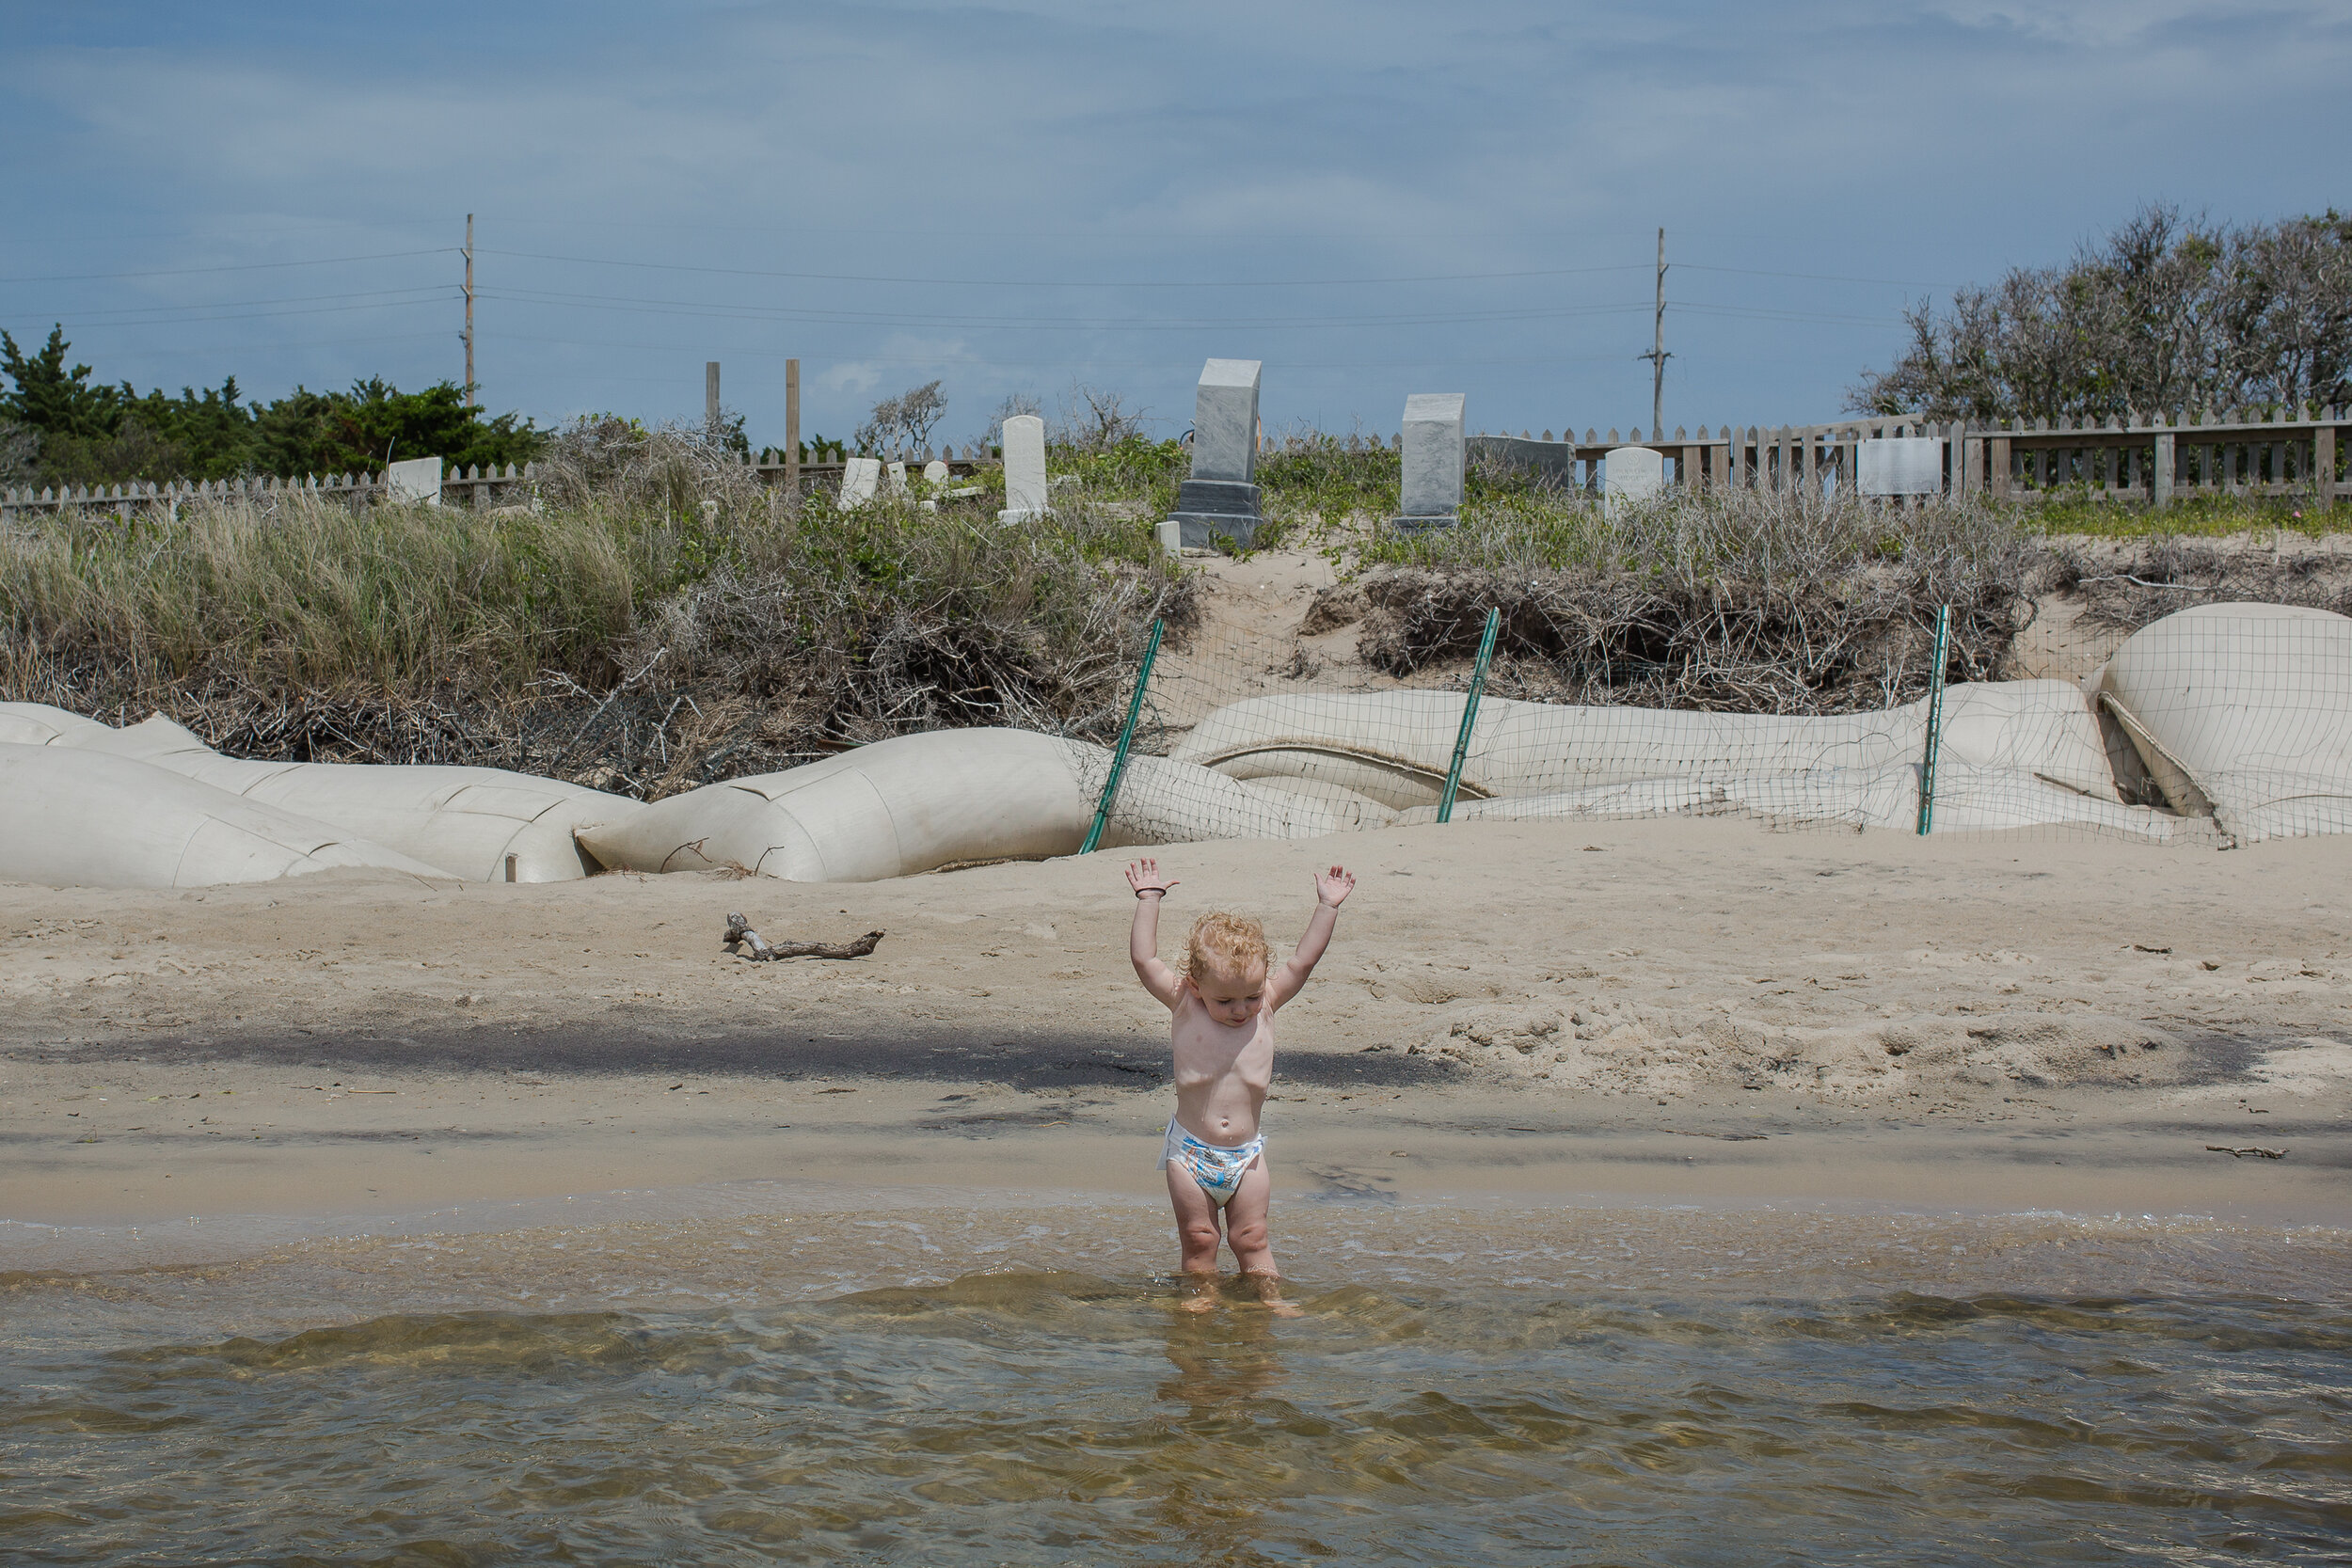  Kaine, 2, plays in the sound near sandbags installed to break waves during storms and slow erosion in the cemetery. May 2018. 